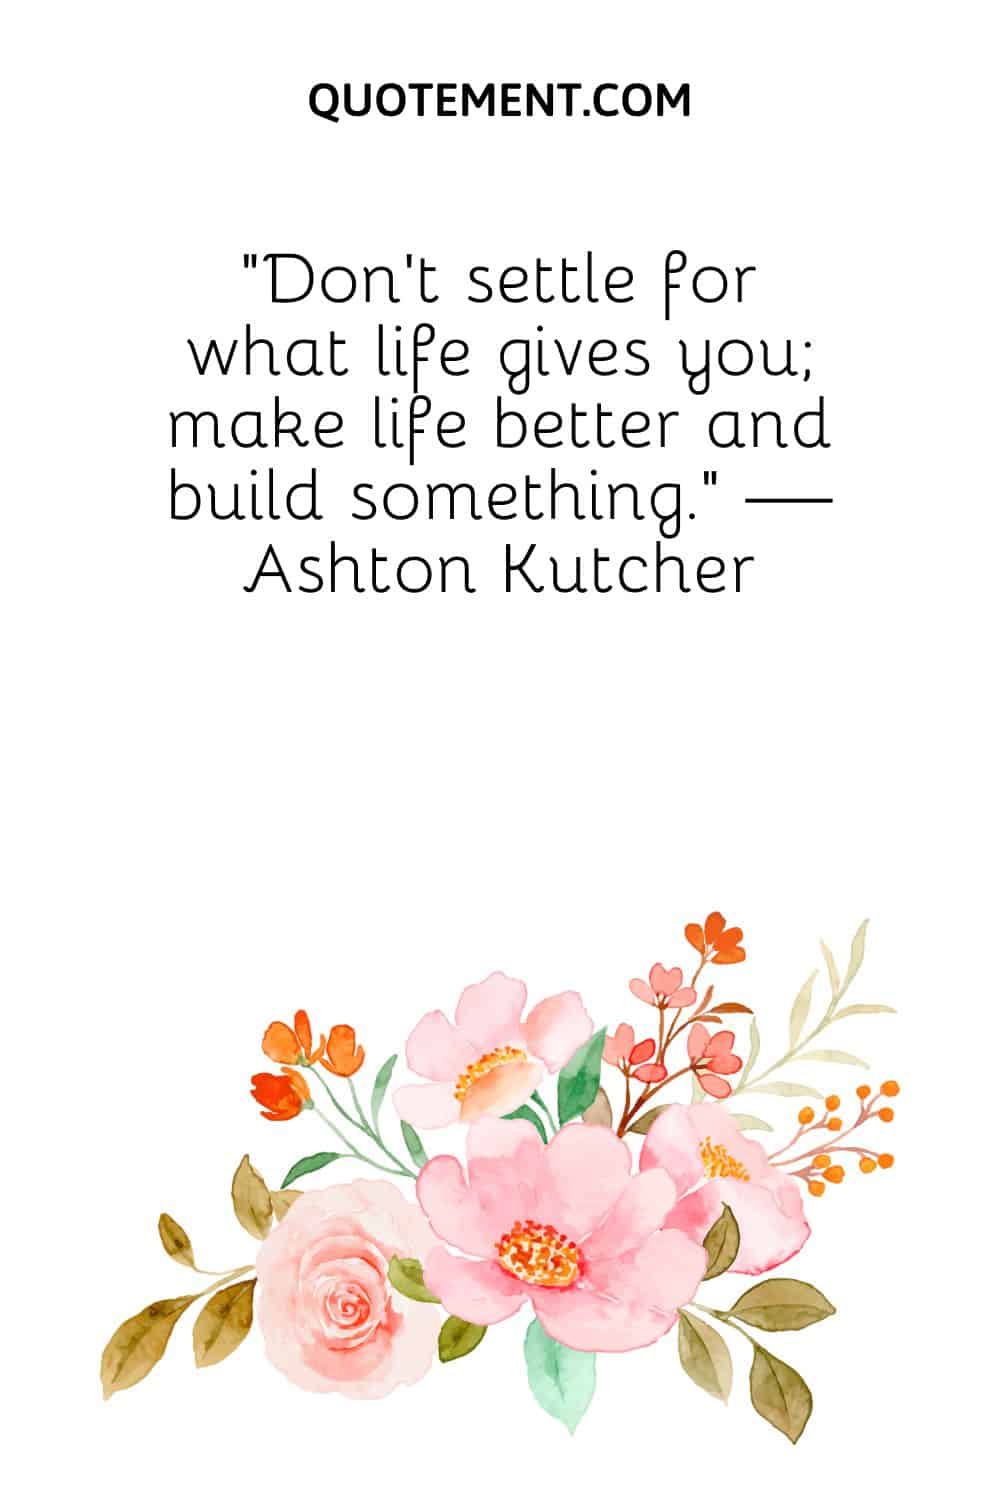 Don’t settle for what life gives you